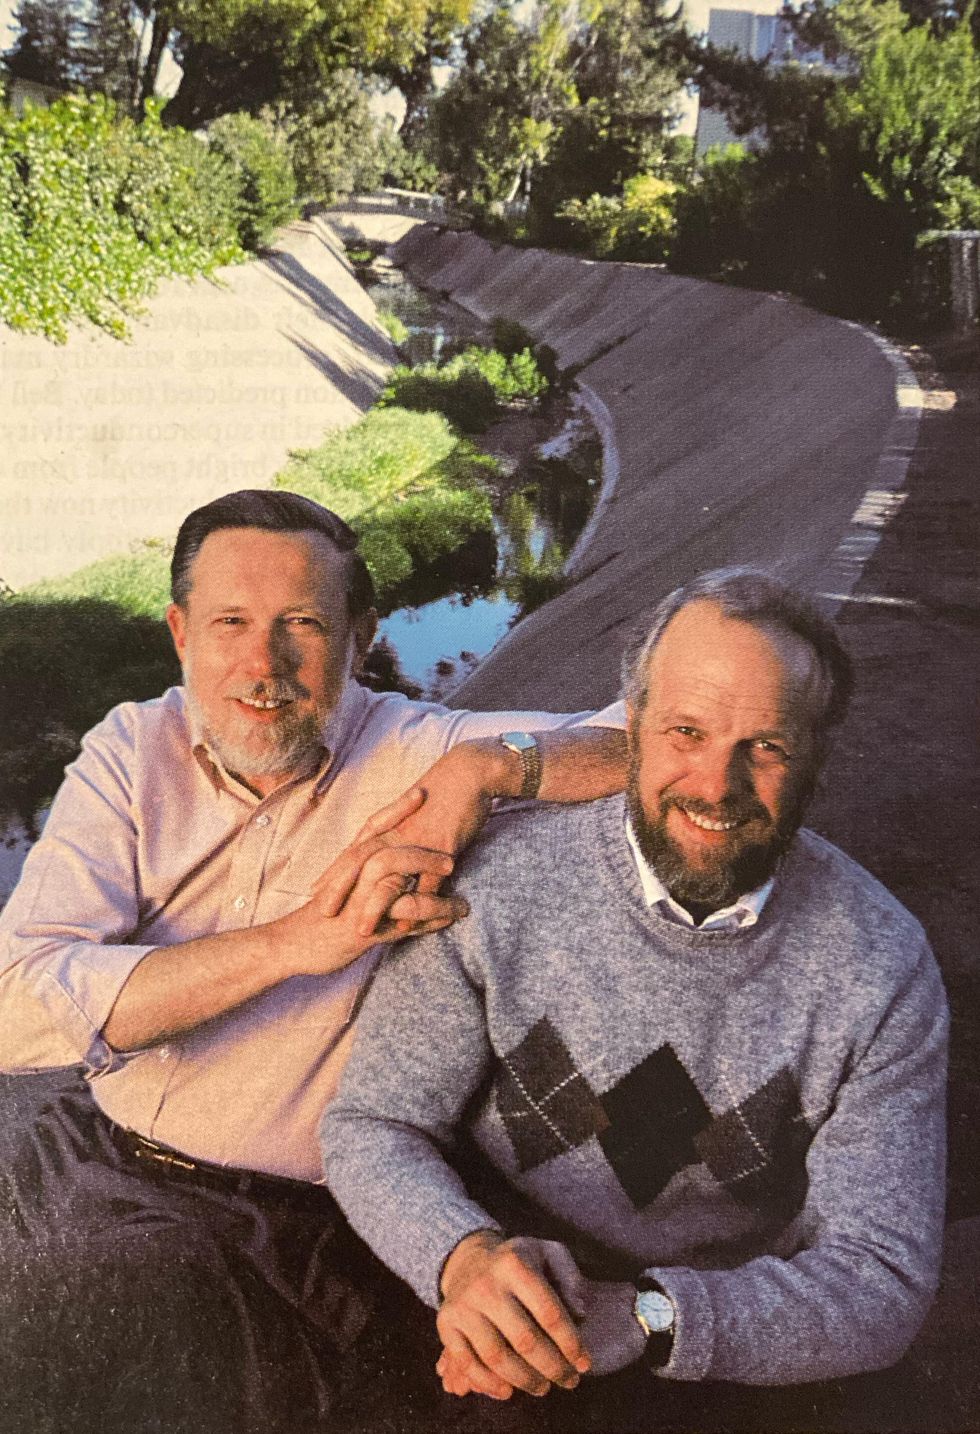 Two men with beards and mustaches seated near a creek bed with concrete sides